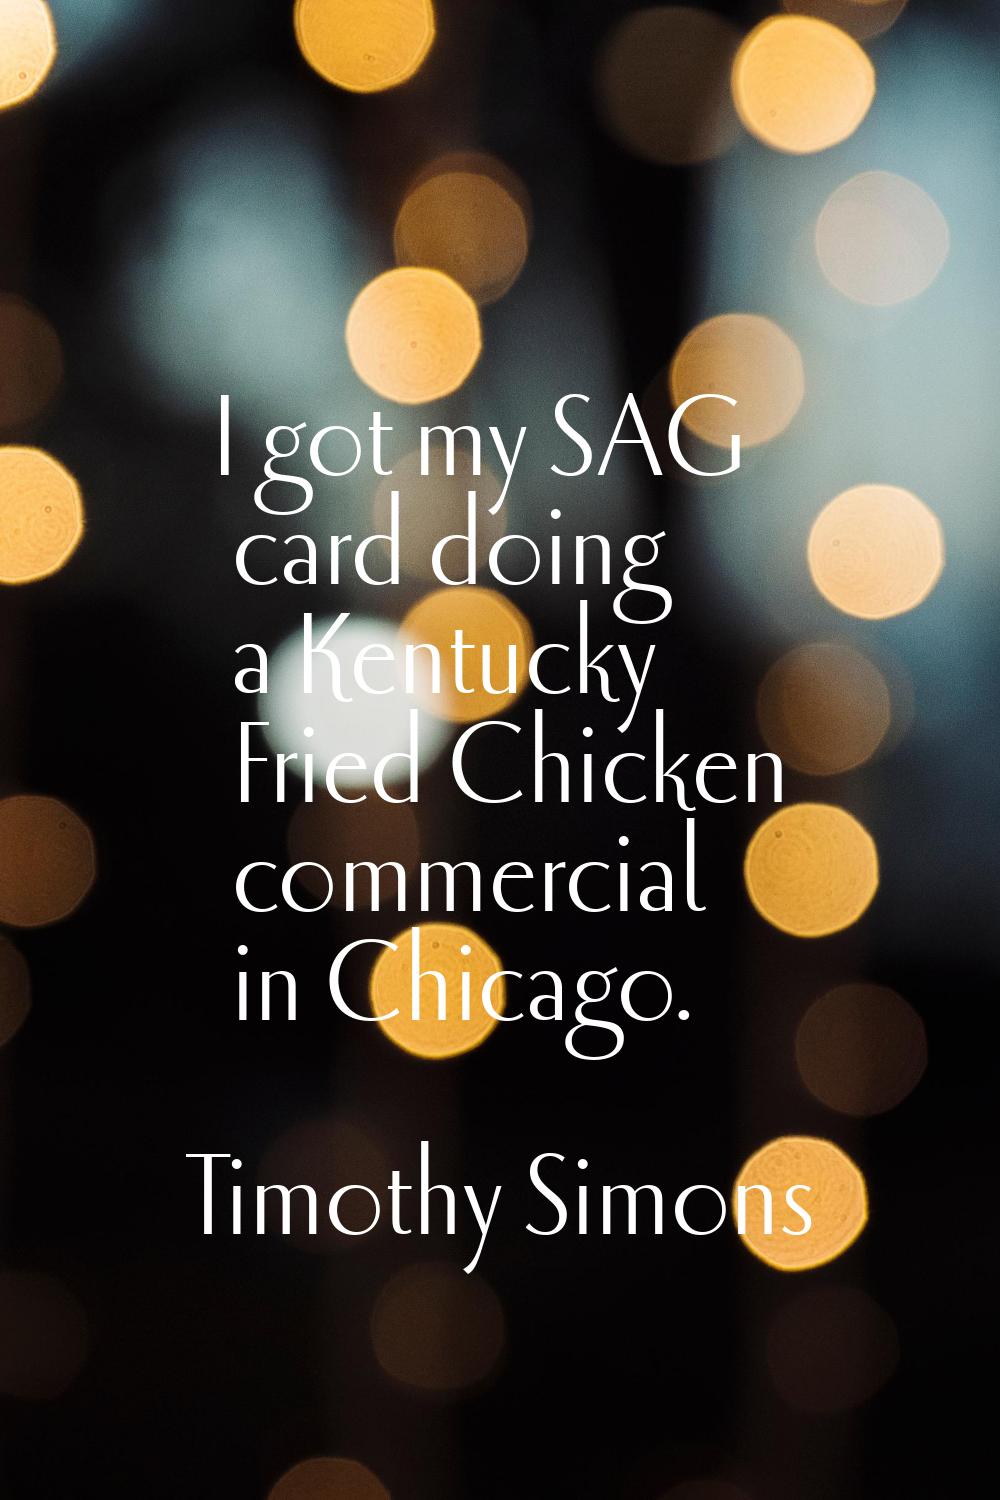 I got my SAG card doing a Kentucky Fried Chicken commercial in Chicago.